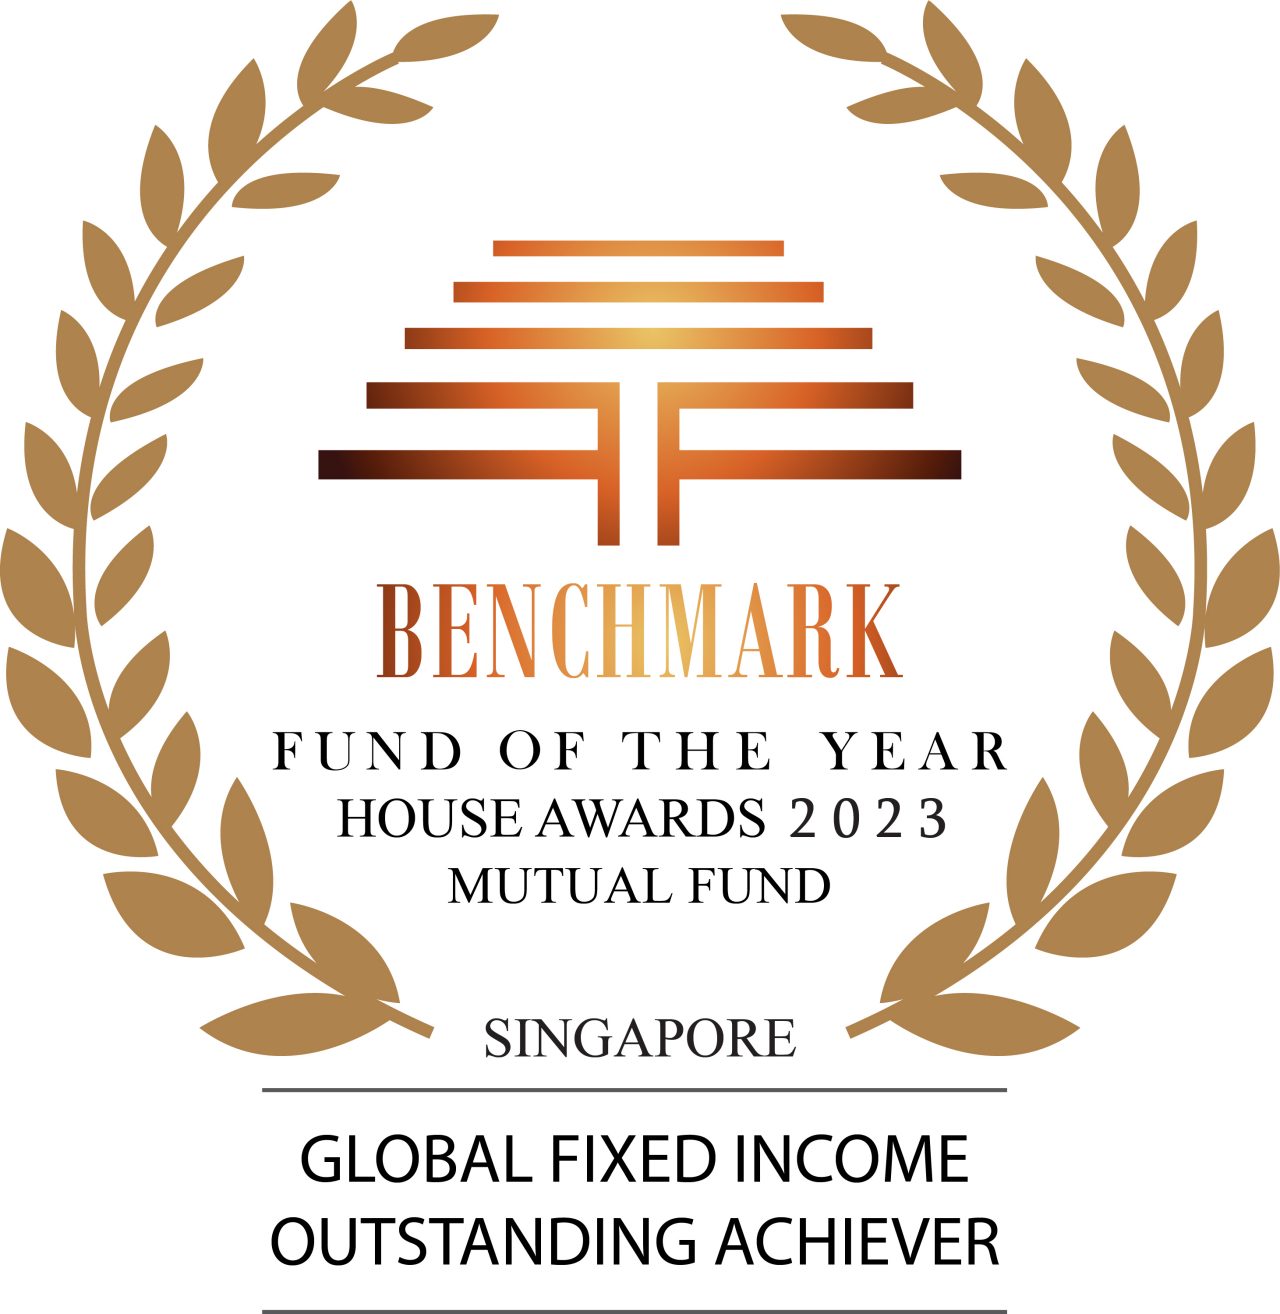 FOYA2021-MUTUAL FUND-SG-HOUSE AWARDS-ASIA FIXED INCOME-BIC